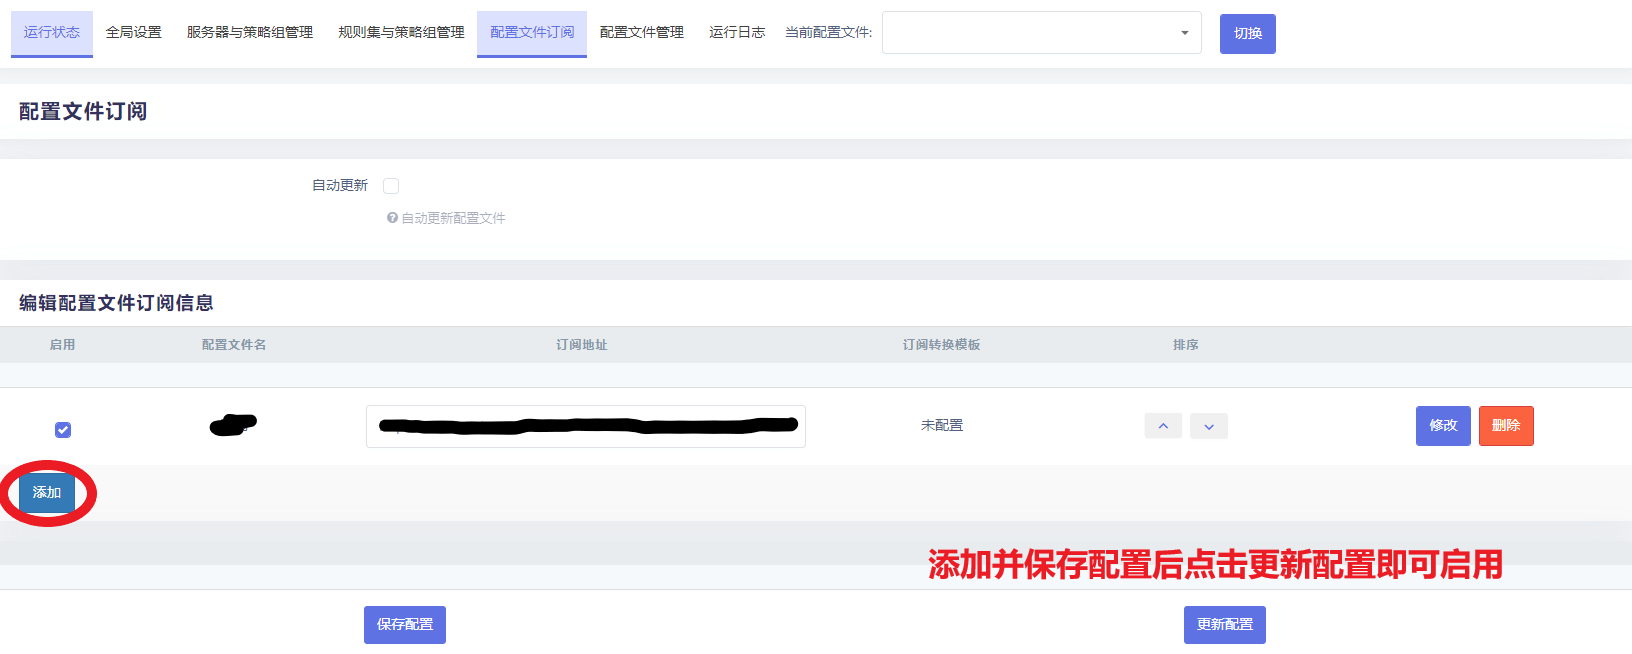 openclash配置文件订阅.png